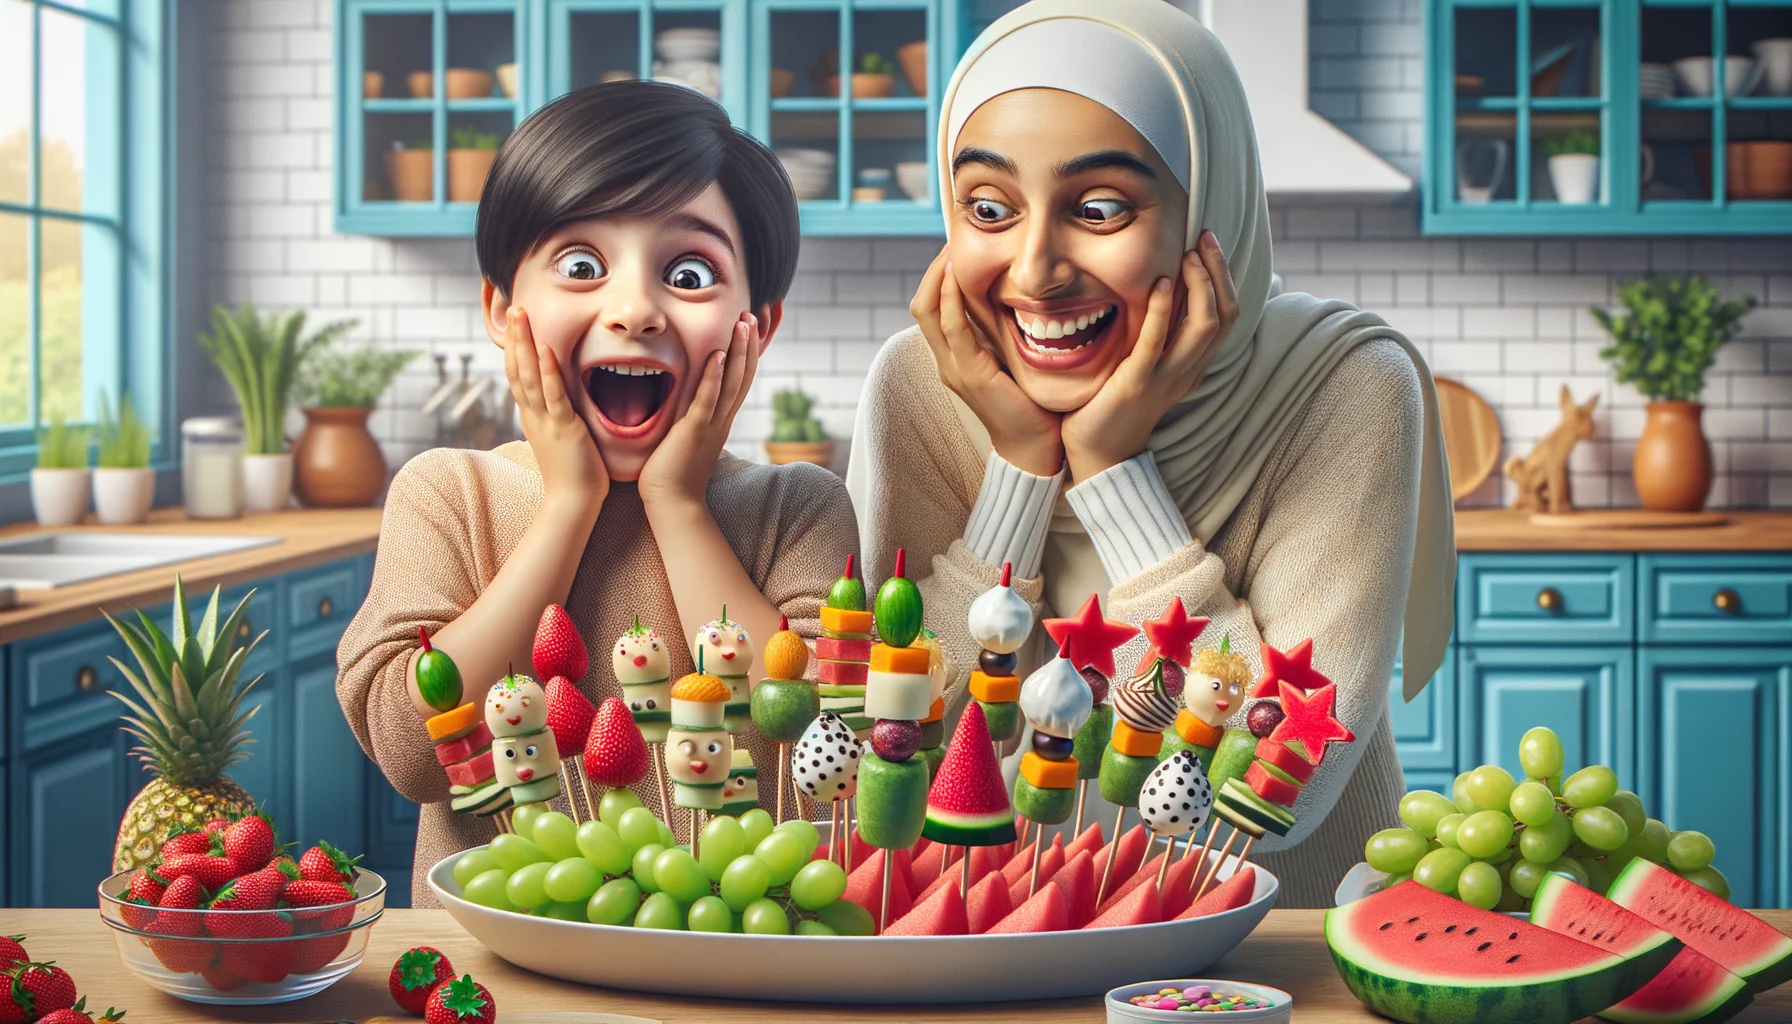 Depict a humorous, realistic scene in a vibrant, inviting kitchen, where two joyful children, one South Asian girl and one Caucasian boy, exhibiting wide-eyed amazement at the sight of a variety of 'child-friendly healthy candy alternatives.' The assortment should include fun-shaped fruits like watermelon stars, grape kabobs, banana lolli-pops with yogurt and sprinkles, and creative vegetable creations mimicking the look of traditional candies. Around them, their Middle-Eastern mother warmly chuckles at their reactions. The atmosphere should ooze excitement, surprise, and healthy indulgence.